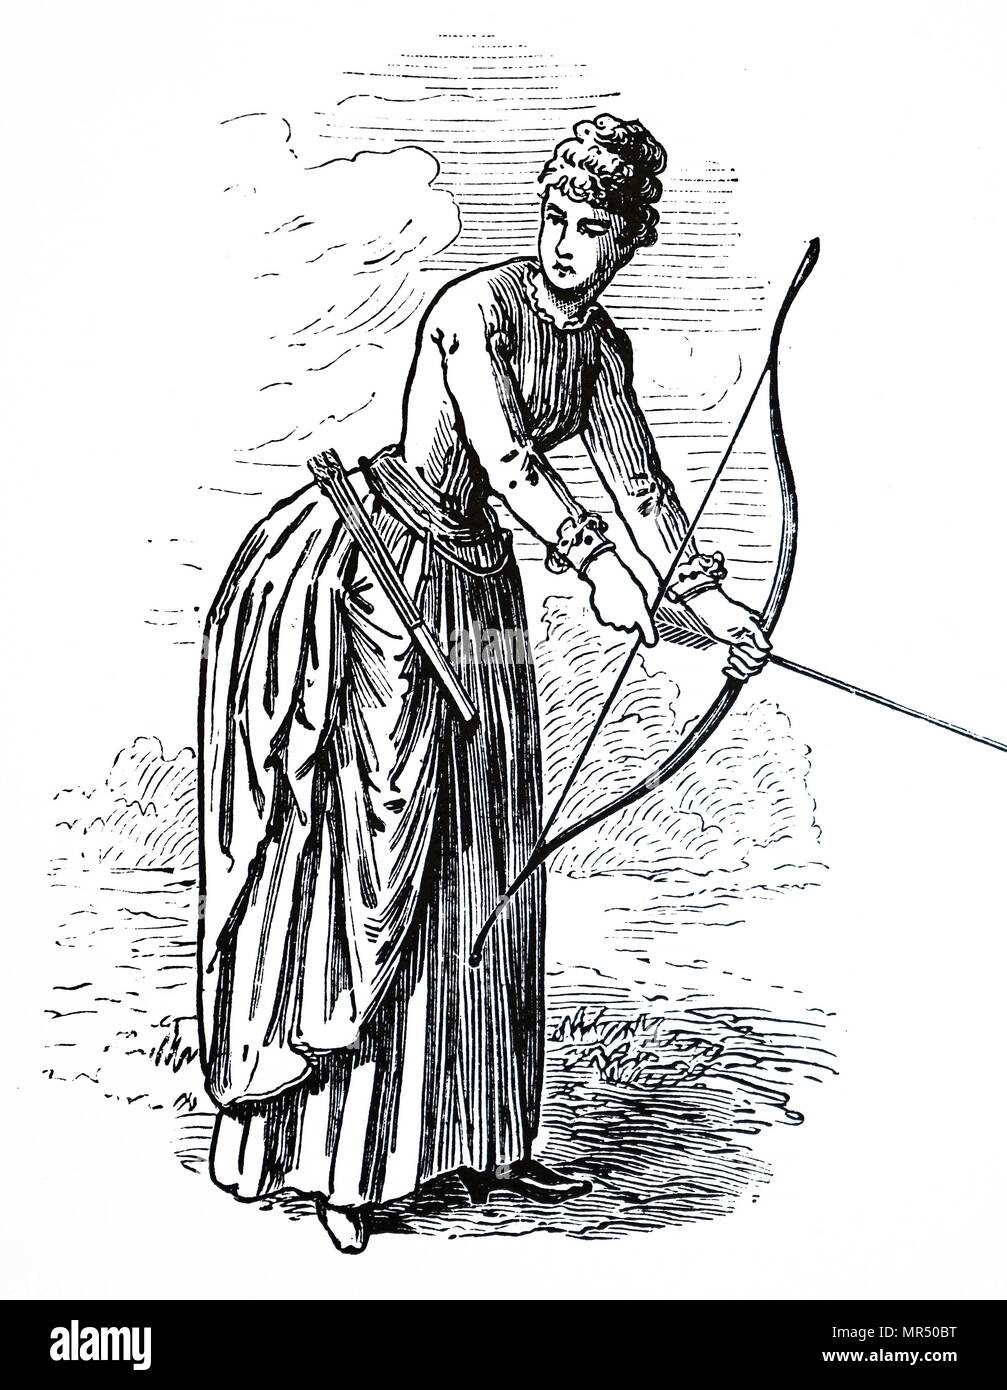 Engraving depicting a young lady practising her archery skills. Dated 19th century Stock Photo